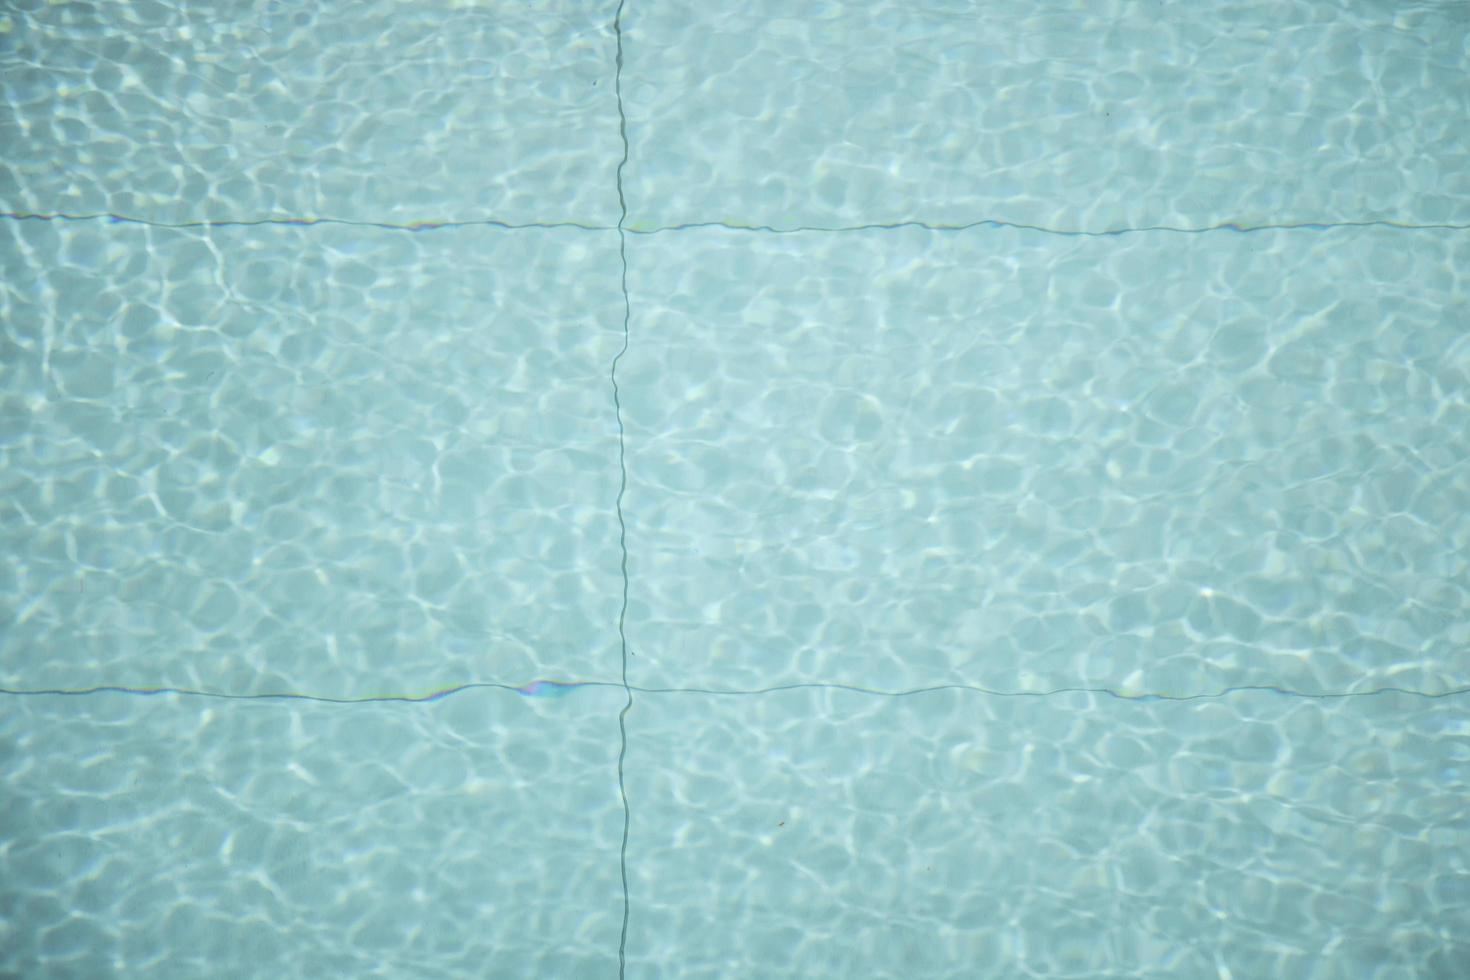 The water in the pool photo